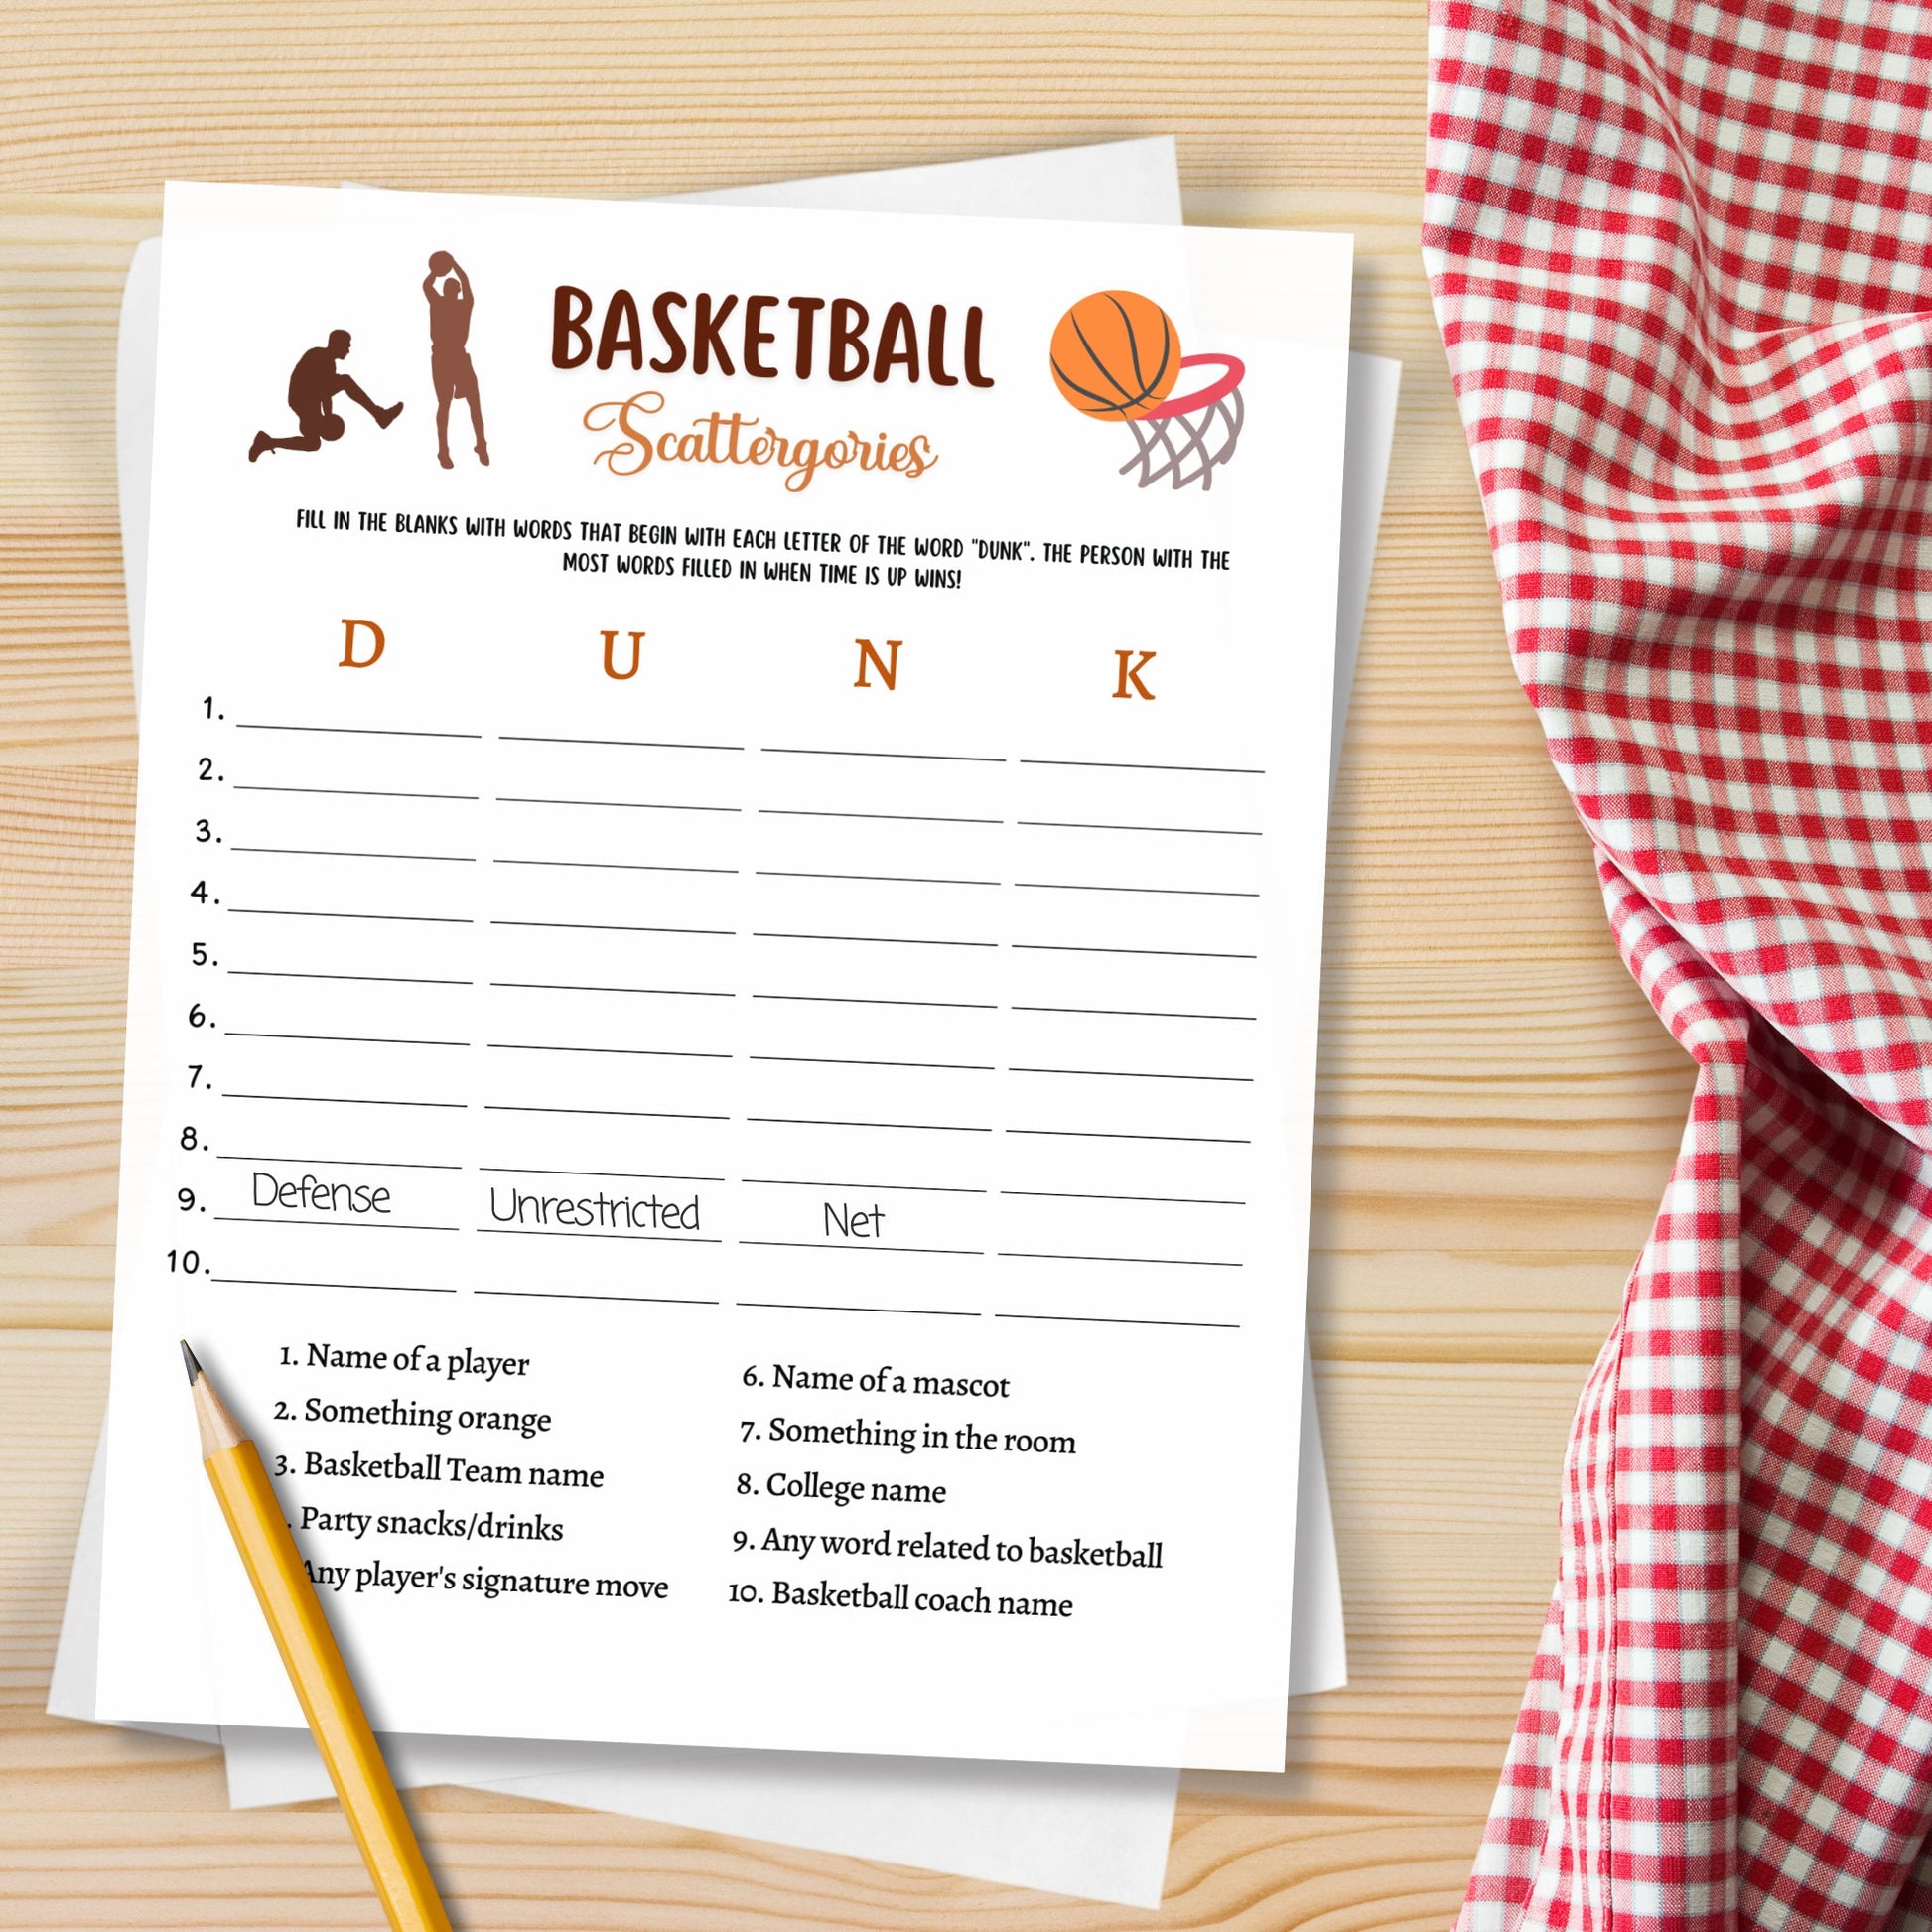 Basketball Scattergories Game Printable, Basketball Tailgate Party Game, Mens College Basketball, Adults And Kids Activity, Classroom Games